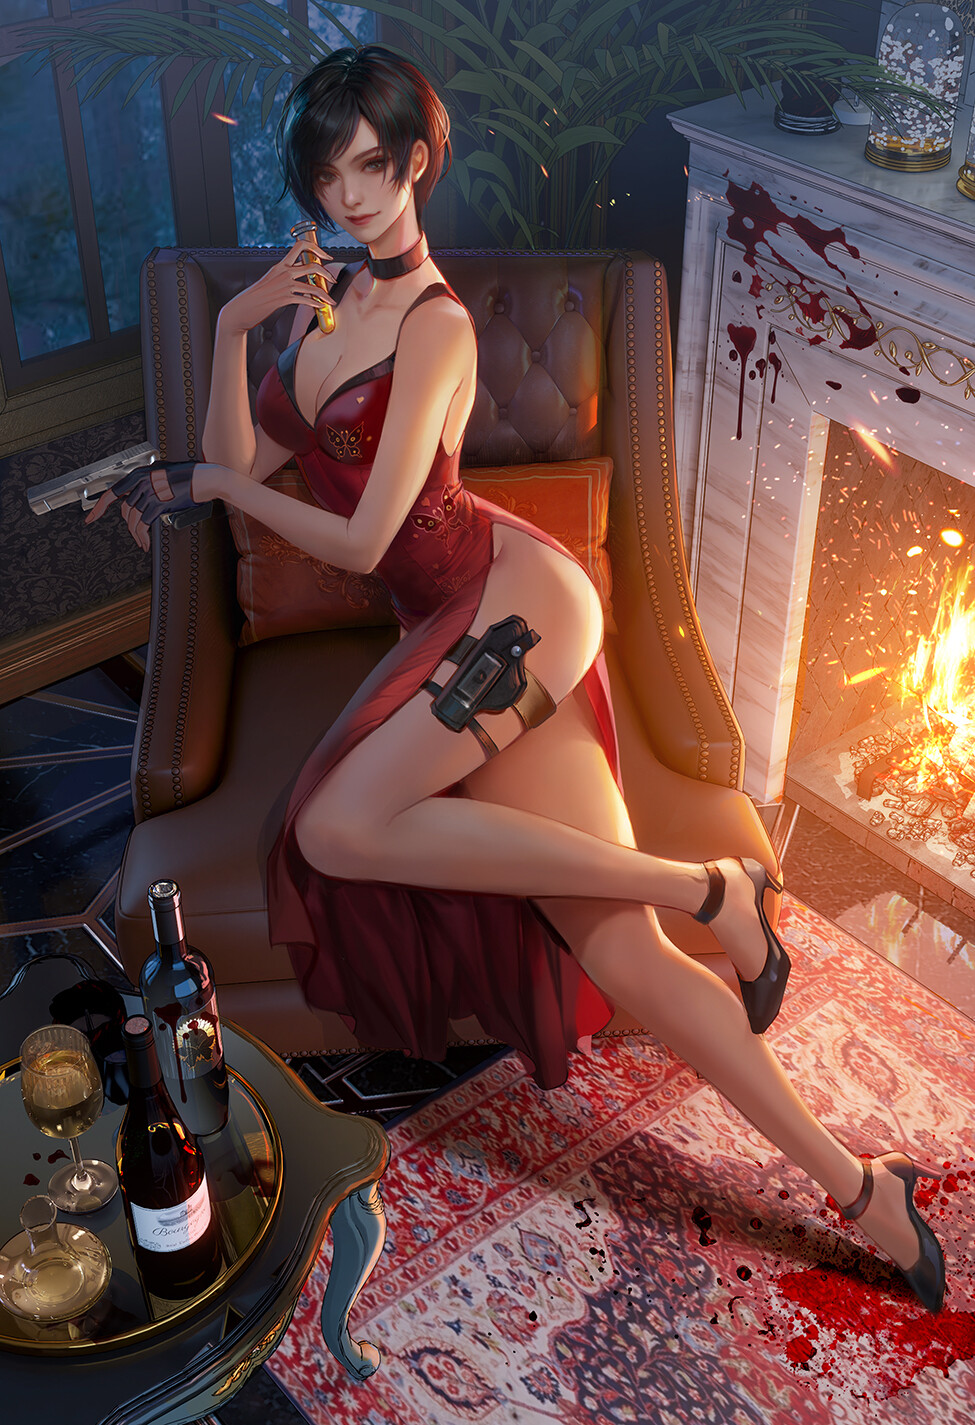 General 975x1425 Fan Yang drawing Ada Wong red dress fireplace Resident Evil portrait display dress video game characters video game girls thighs heels video games looking at viewer choker smiling short hair gun girls with guns gloves fingerless gloves cleavage big boobs carpet wine glass wine Resident Evil 2 resident evil 4 remake whole body blood leaves Resident Evil 4